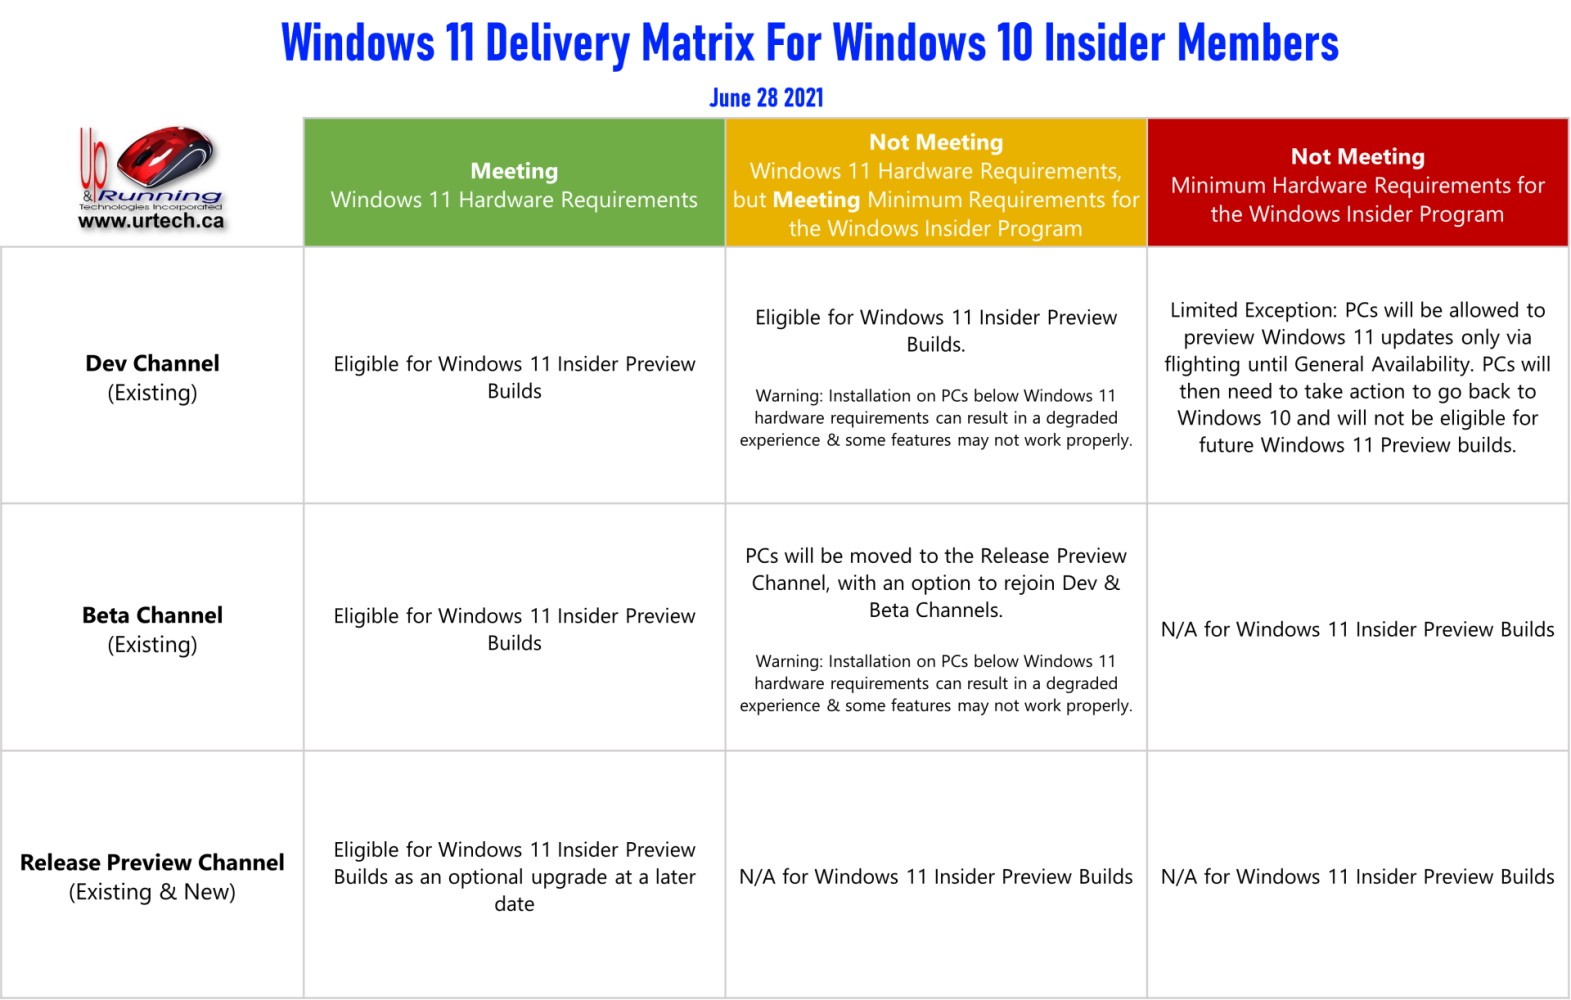 SOLVED: Download Windows 11 Now  Up & Running Technologies, Tech How To's